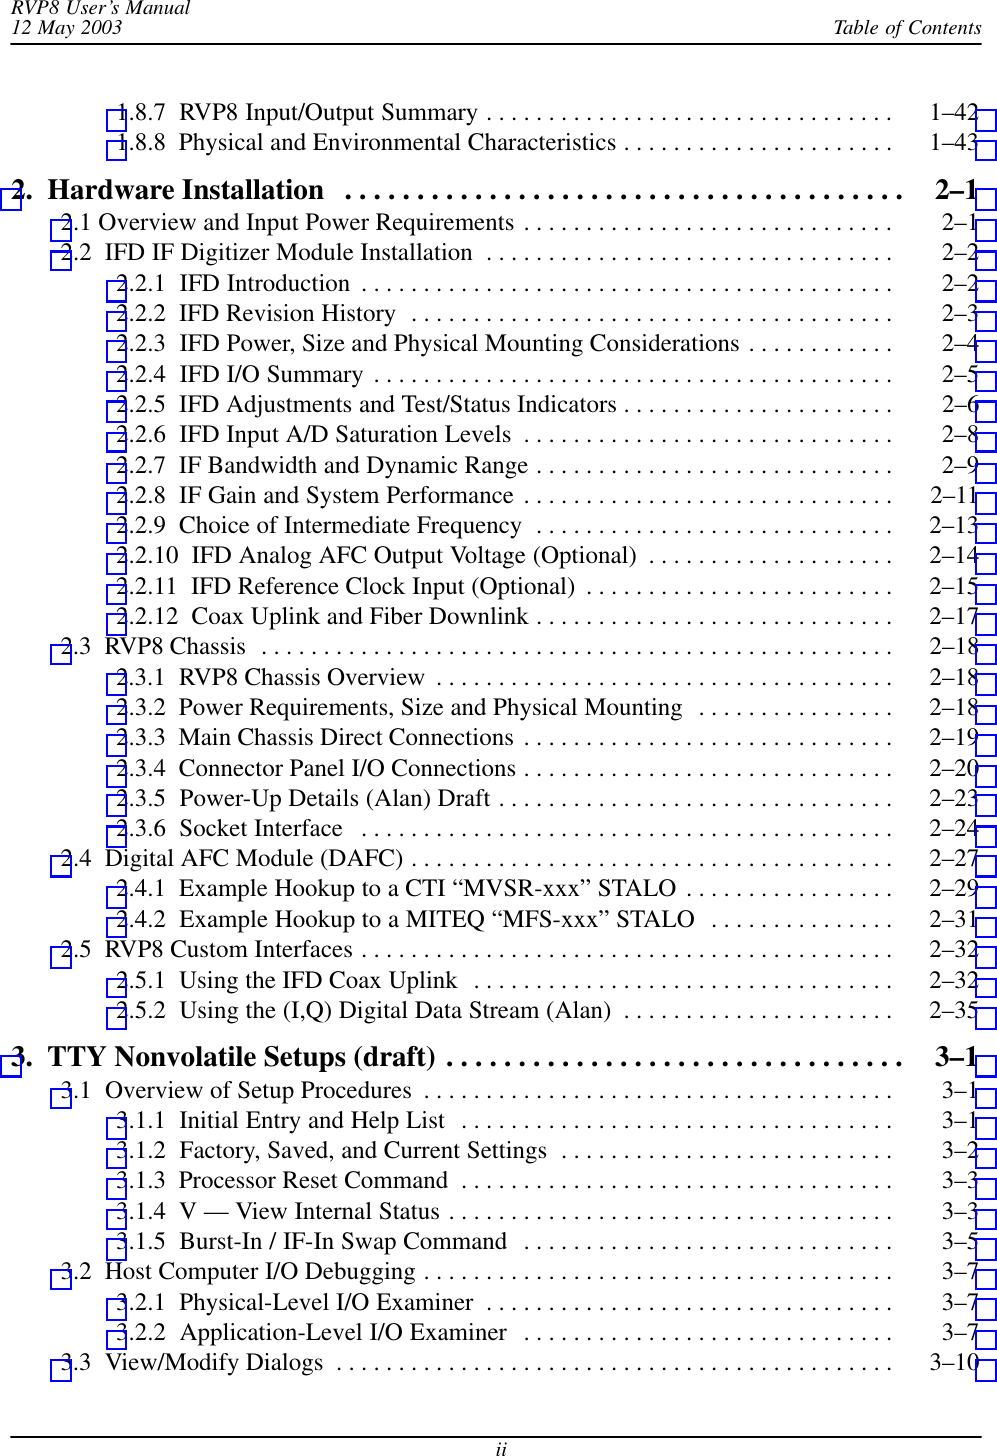 Table of ContentsRVP8 User’s Manual12 May 2003ii1.8.7  RVP8 Input/Output Summary 1–42 . . . . . . . . . . . . . . . . . . . . . . . . . . . . . . . . . 1.8.8  Physical and Environmental Characteristics 1–43 . . . . . . . . . . . . . . . . . . . . . . 2.  Hardware Installation 2–1 . . . . . . . . . . . . . . . . . . . . . . . . . . . . . . . . . . . . . . . 2.1 Overview and Input Power Requirements 2–1 . . . . . . . . . . . . . . . . . . . . . . . . . . . . . . 2.2  IFD IF Digitizer Module Installation 2–2 . . . . . . . . . . . . . . . . . . . . . . . . . . . . . . . . . 2.2.1  IFD Introduction 2–2 . . . . . . . . . . . . . . . . . . . . . . . . . . . . . . . . . . . . . . . . . . . 2.2.2  IFD Revision History 2–3 . . . . . . . . . . . . . . . . . . . . . . . . . . . . . . . . . . . . . . . 2.2.3  IFD Power, Size and Physical Mounting Considerations 2–4 . . . . . . . . . . . . 2.2.4  IFD I/O Summary 2–5 . . . . . . . . . . . . . . . . . . . . . . . . . . . . . . . . . . . . . . . . . . 2.2.5  IFD Adjustments and Test/Status Indicators 2–6 . . . . . . . . . . . . . . . . . . . . . . 2.2.6  IFD Input A/D Saturation Levels 2–8 . . . . . . . . . . . . . . . . . . . . . . . . . . . . . . 2.2.7  IF Bandwidth and Dynamic Range 2–9 . . . . . . . . . . . . . . . . . . . . . . . . . . . . . 2.2.8  IF Gain and System Performance 2–11 . . . . . . . . . . . . . . . . . . . . . . . . . . . . . . 2.2.9  Choice of Intermediate Frequency 2–13 . . . . . . . . . . . . . . . . . . . . . . . . . . . . . 2.2.10  IFD Analog AFC Output Voltage (Optional) 2–14 . . . . . . . . . . . . . . . . . . . . 2.2.11  IFD Reference Clock Input (Optional) 2–15 . . . . . . . . . . . . . . . . . . . . . . . . . 2.2.12  Coax Uplink and Fiber Downlink 2–17 . . . . . . . . . . . . . . . . . . . . . . . . . . . . . 2.3  RVP8 Chassis 2–18 . . . . . . . . . . . . . . . . . . . . . . . . . . . . . . . . . . . . . . . . . . . . . . . . . . . 2.3.1  RVP8 Chassis Overview 2–18 . . . . . . . . . . . . . . . . . . . . . . . . . . . . . . . . . . . . . 2.3.2  Power Requirements, Size and Physical Mounting 2–18 . . . . . . . . . . . . . . . . 2.3.3  Main Chassis Direct Connections 2–19 . . . . . . . . . . . . . . . . . . . . . . . . . . . . . . 2.3.4  Connector Panel I/O Connections 2–20 . . . . . . . . . . . . . . . . . . . . . . . . . . . . . . 2.3.5  Power-Up Details (Alan) Draft 2–23 . . . . . . . . . . . . . . . . . . . . . . . . . . . . . . . . 2.3.6  Socket Interface 2–24 . . . . . . . . . . . . . . . . . . . . . . . . . . . . . . . . . . . . . . . . . . . 2.4  Digital AFC Module (DAFC) 2–27 . . . . . . . . . . . . . . . . . . . . . . . . . . . . . . . . . . . . . . . 2.4.1  Example Hookup to a CTI “MVSR-xxx” STALO 2–29 . . . . . . . . . . . . . . . . . 2.4.2  Example Hookup to a MITEQ “MFS-xxx” STALO 2–31 . . . . . . . . . . . . . . . 2.5  RVP8 Custom Interfaces 2–32 . . . . . . . . . . . . . . . . . . . . . . . . . . . . . . . . . . . . . . . . . . . 2.5.1  Using the IFD Coax Uplink 2–32 . . . . . . . . . . . . . . . . . . . . . . . . . . . . . . . . . . 2.5.2  Using the (I,Q) Digital Data Stream (Alan) 2–35 . . . . . . . . . . . . . . . . . . . . . . 3.  TTY Nonvolatile Setups (draft) 3–1 . . . . . . . . . . . . . . . . . . . . . . . . . . . . . . . . 3.1  Overview of Setup Procedures 3–1 . . . . . . . . . . . . . . . . . . . . . . . . . . . . . . . . . . . . . . 3.1.1  Initial Entry and Help List 3–1 . . . . . . . . . . . . . . . . . . . . . . . . . . . . . . . . . . . 3.1.2  Factory, Saved, and Current Settings 3–2 . . . . . . . . . . . . . . . . . . . . . . . . . . . 3.1.3  Processor Reset Command 3–3 . . . . . . . . . . . . . . . . . . . . . . . . . . . . . . . . . . . 3.1.4  V — View Internal Status 3–3 . . . . . . . . . . . . . . . . . . . . . . . . . . . . . . . . . . . . 3.1.5  Burst-In / IF-In Swap Command 3–5 . . . . . . . . . . . . . . . . . . . . . . . . . . . . . . 3.2  Host Computer I/O Debugging 3–7 . . . . . . . . . . . . . . . . . . . . . . . . . . . . . . . . . . . . . . 3.2.1  Physical-Level I/O Examiner 3–7 . . . . . . . . . . . . . . . . . . . . . . . . . . . . . . . . . 3.2.2  Application-Level I/O Examiner 3–7 . . . . . . . . . . . . . . . . . . . . . . . . . . . . . . 3.3  View/Modify Dialogs 3–10 . . . . . . . . . . . . . . . . . . . . . . . . . . . . . . . . . . . . . . . . . . . . . 